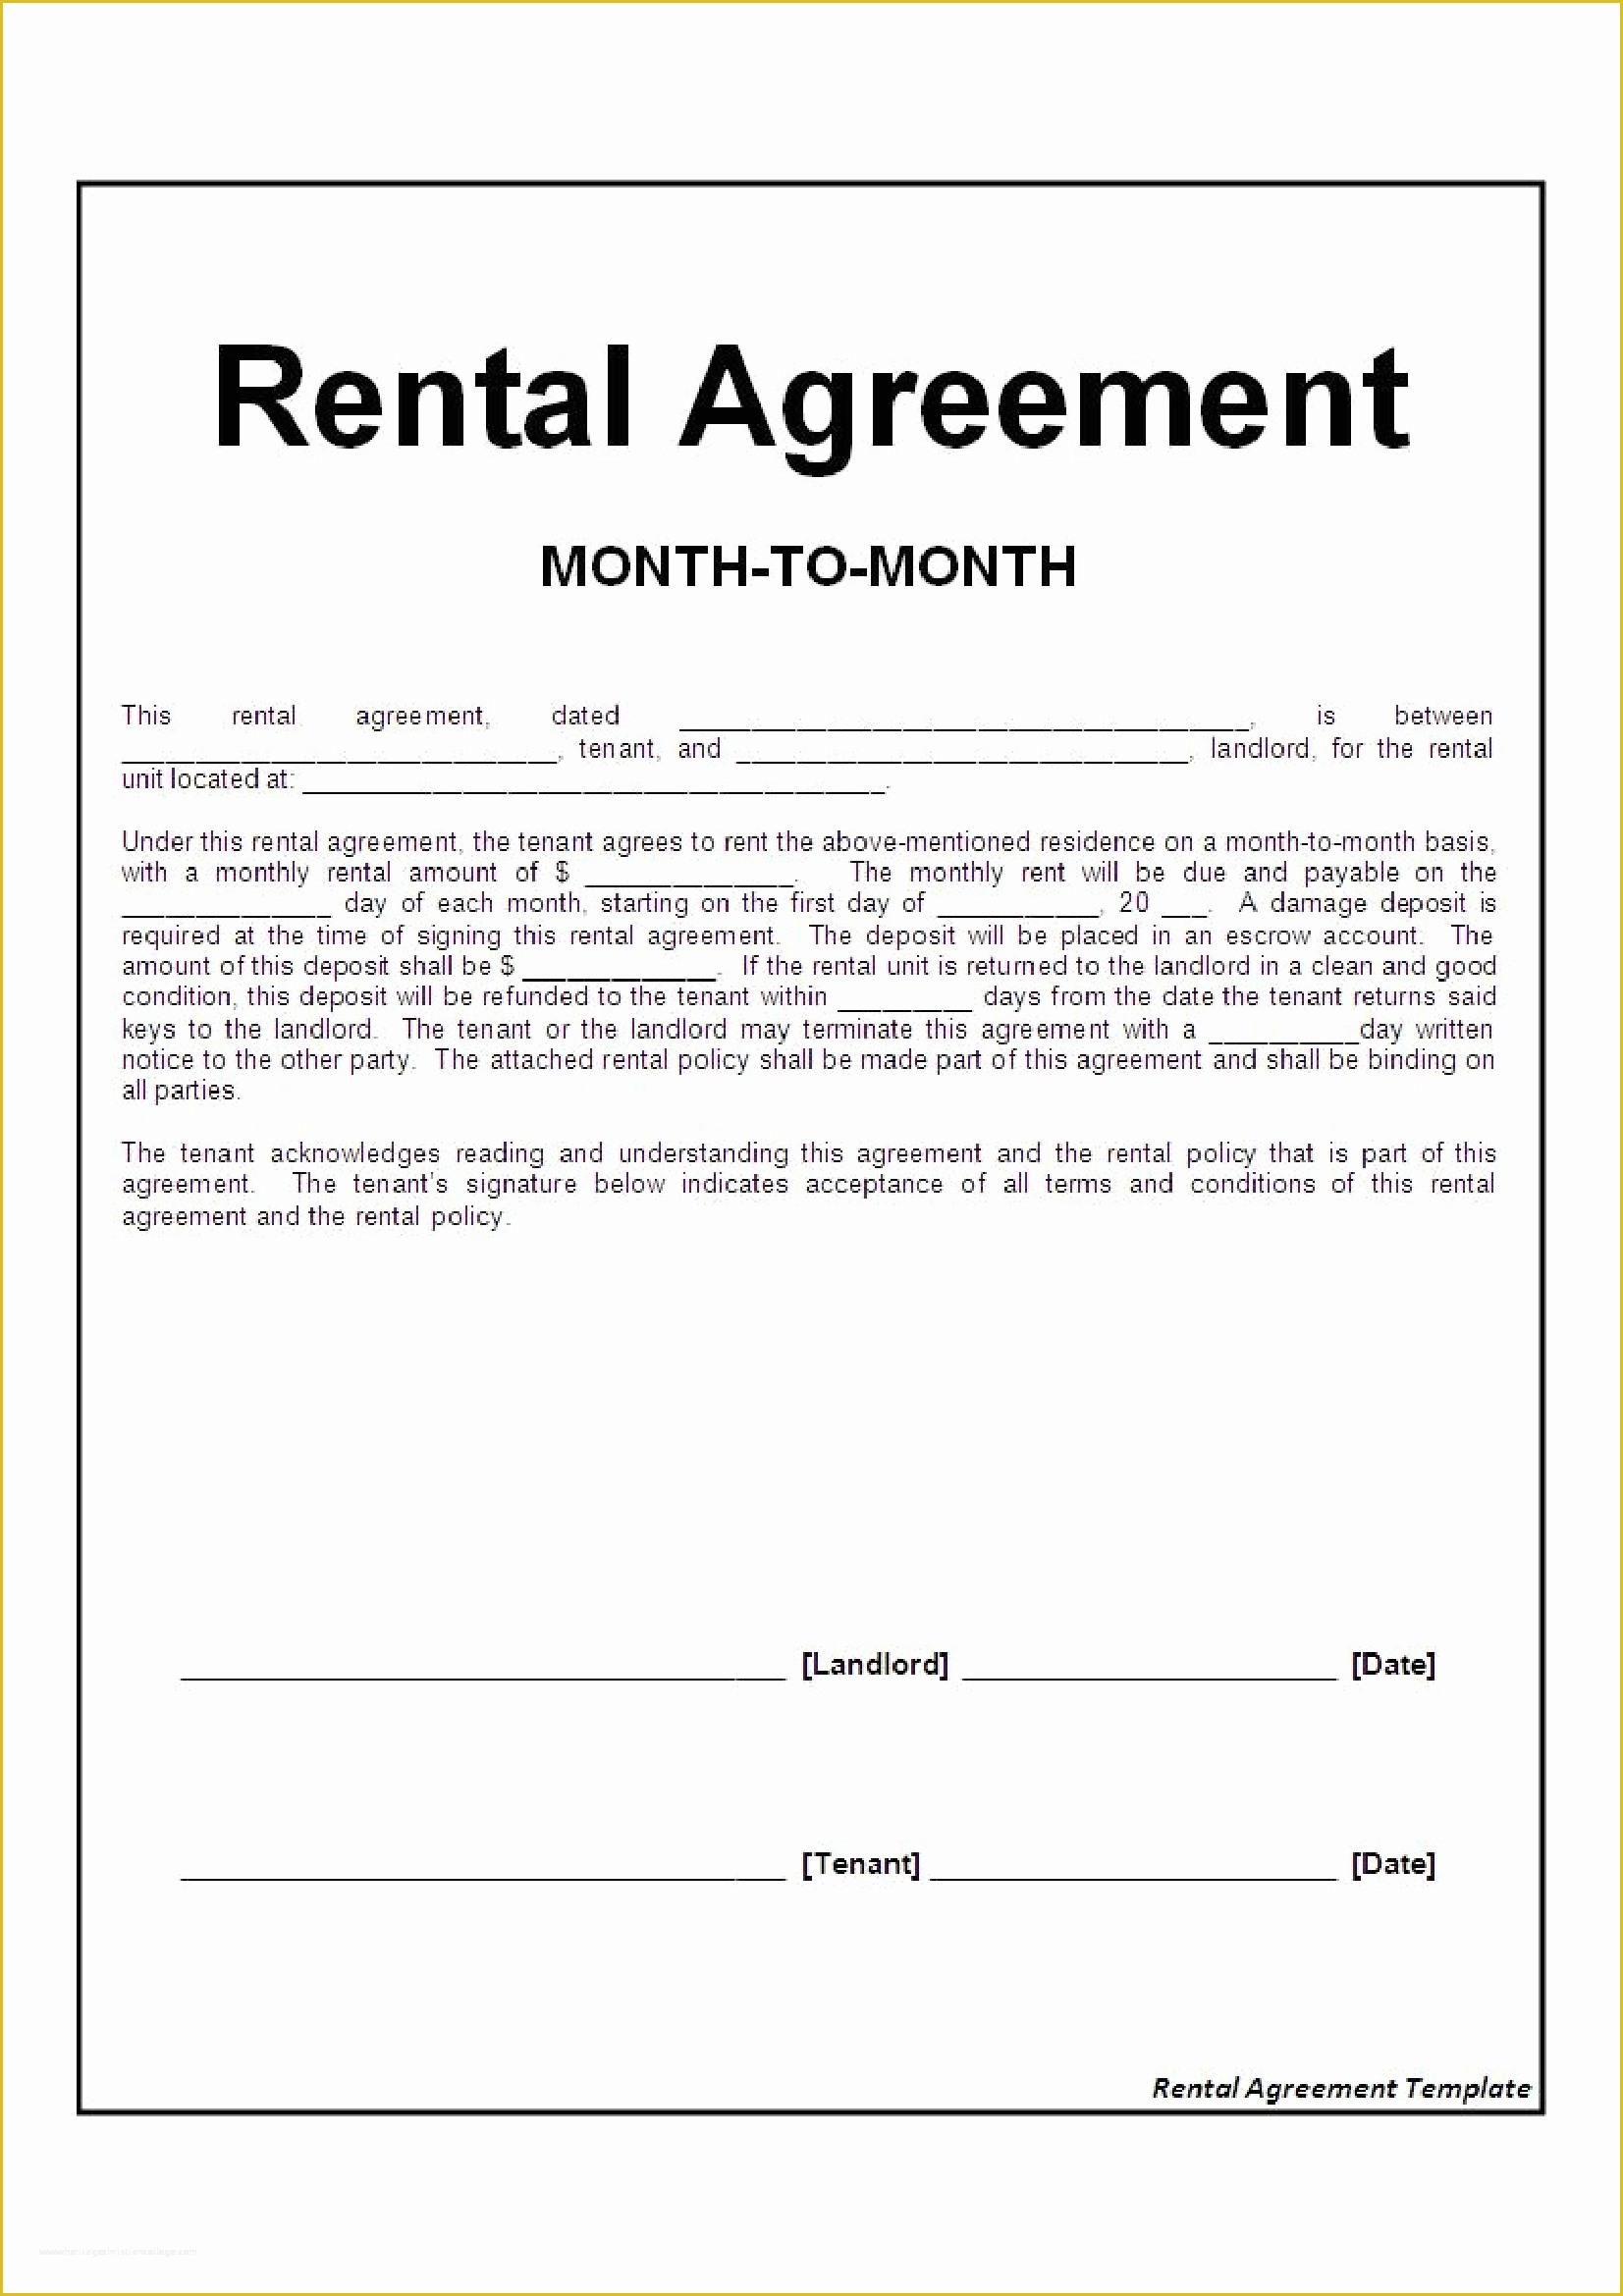 Rental Lease Agreement Template Free Of Letter formats Download Free Business Letter Templates